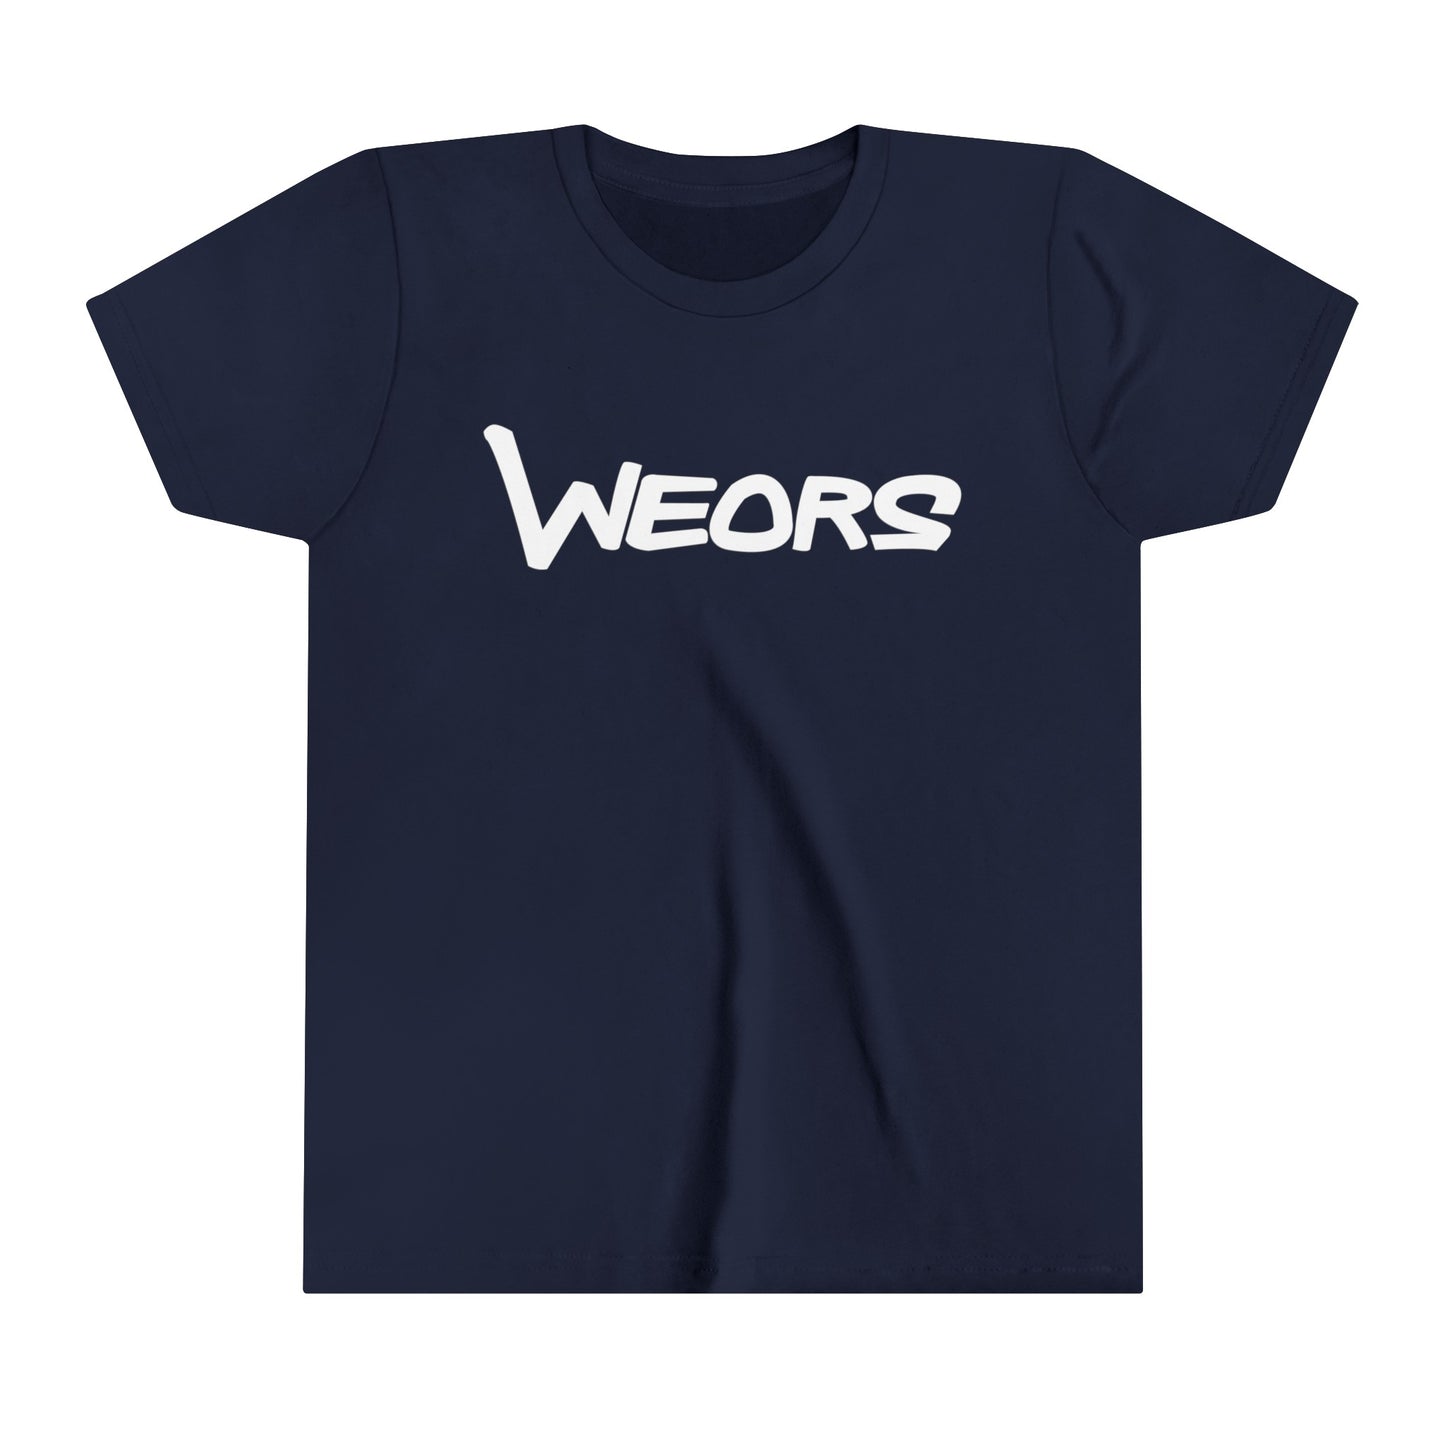 Youth T-shirt - Weors